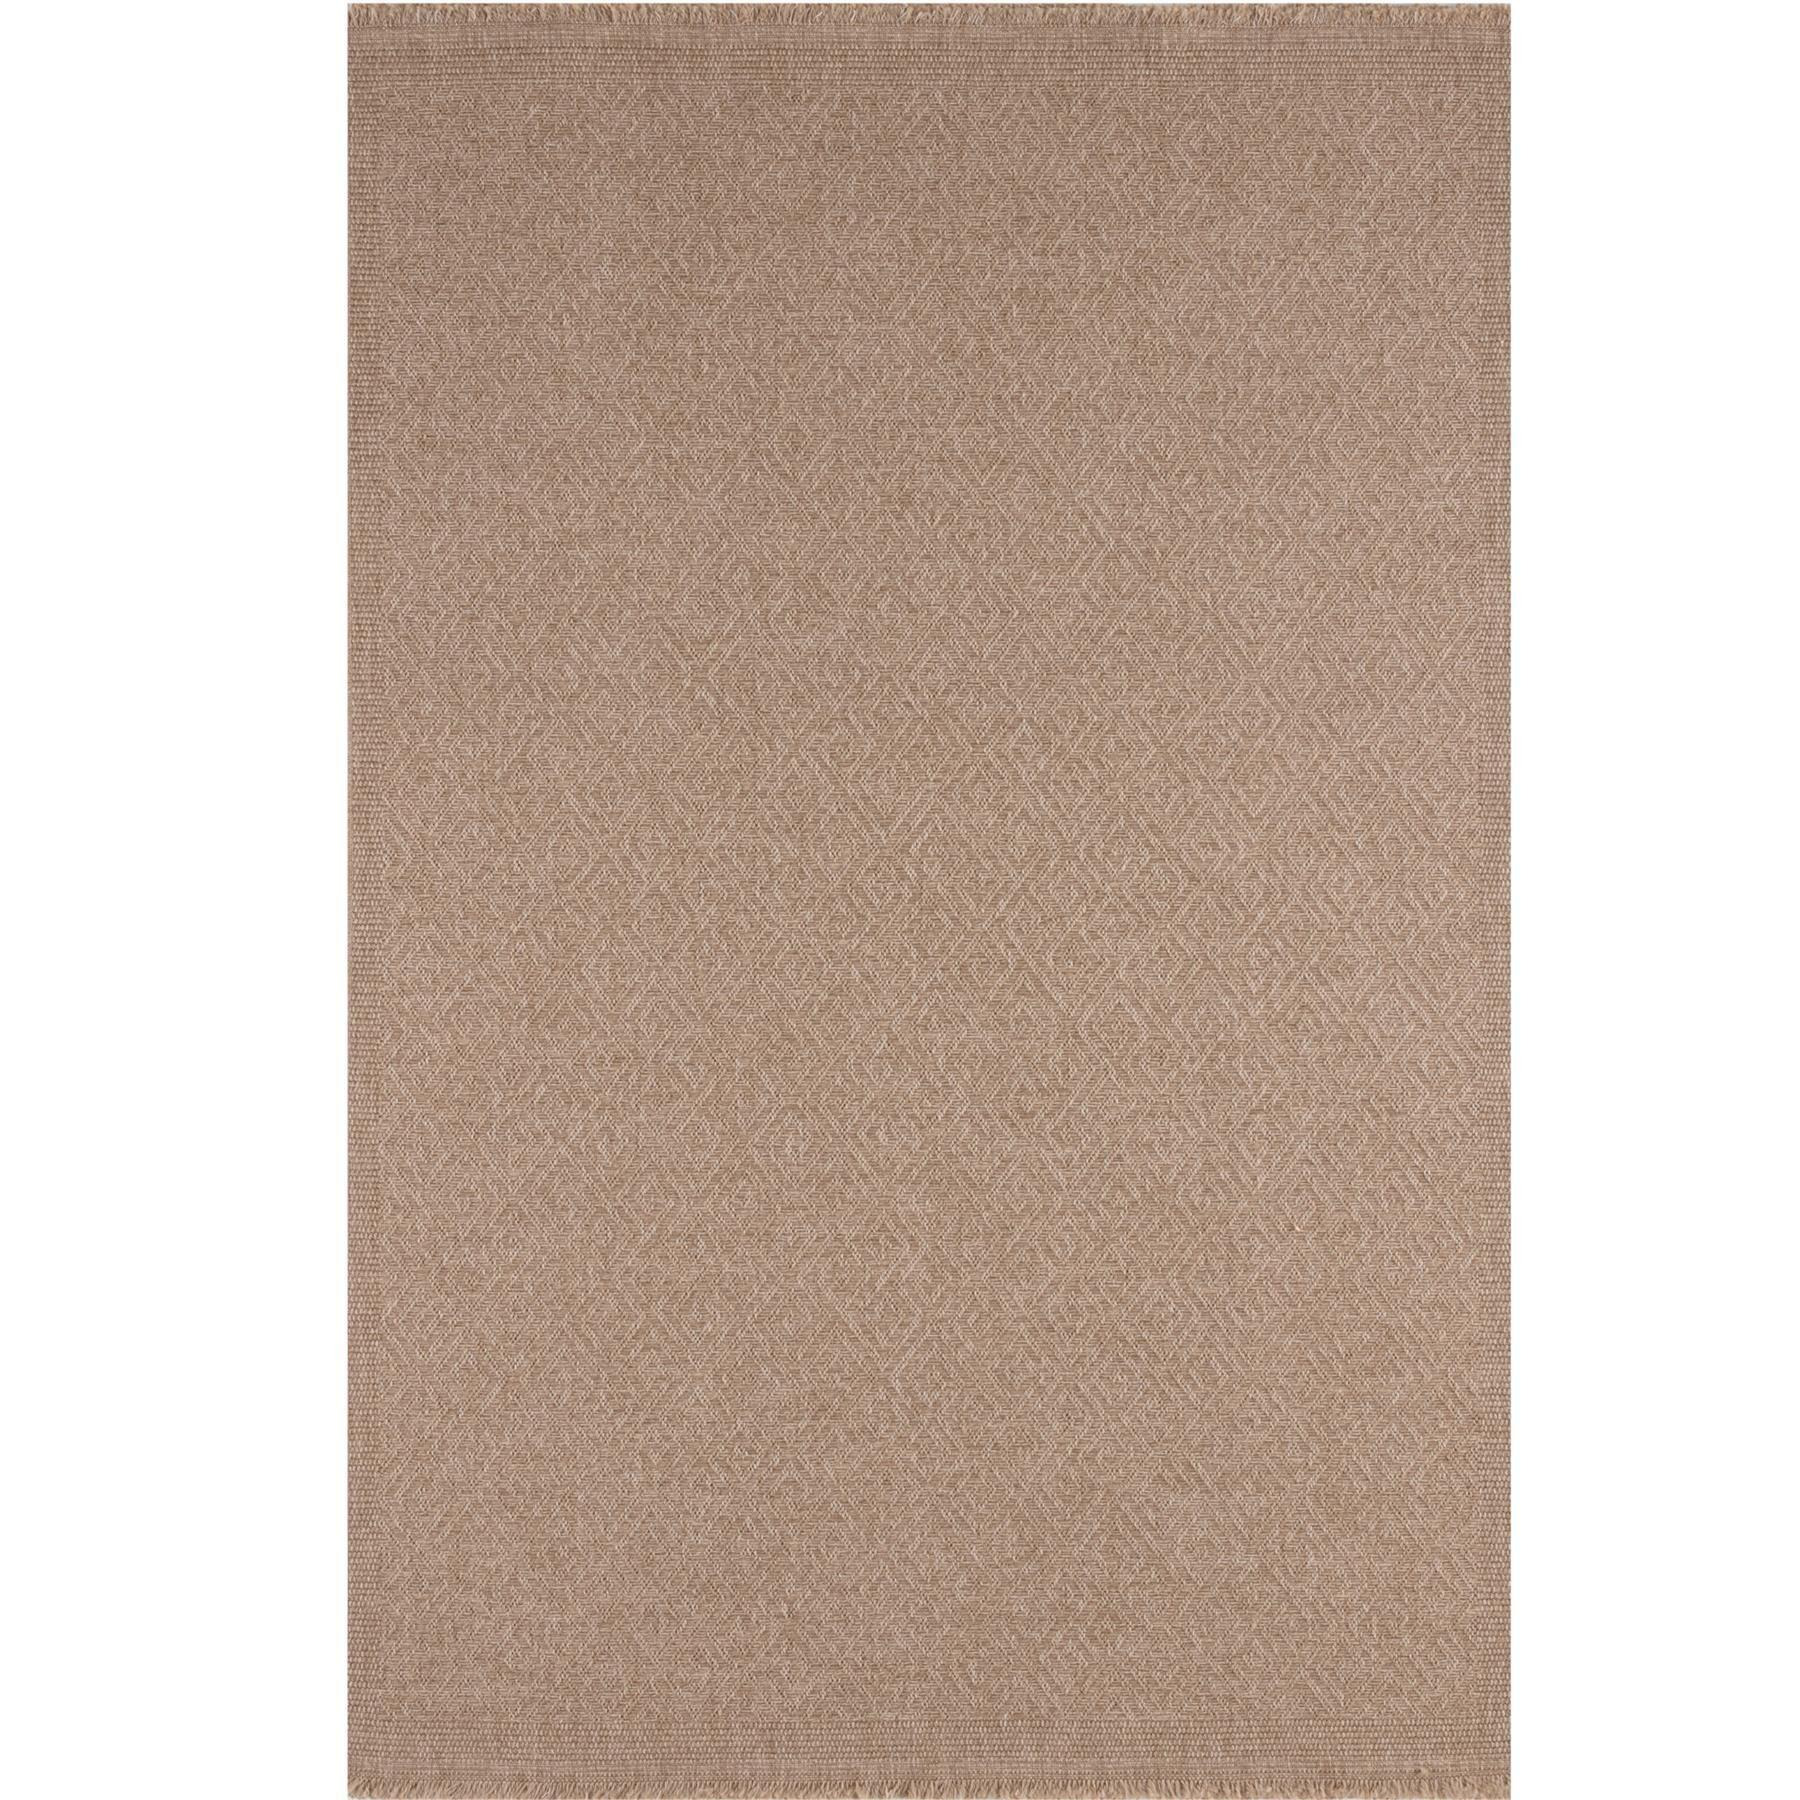 Nature Collection Outdoor Rug in Neutral - 5100N - image 1